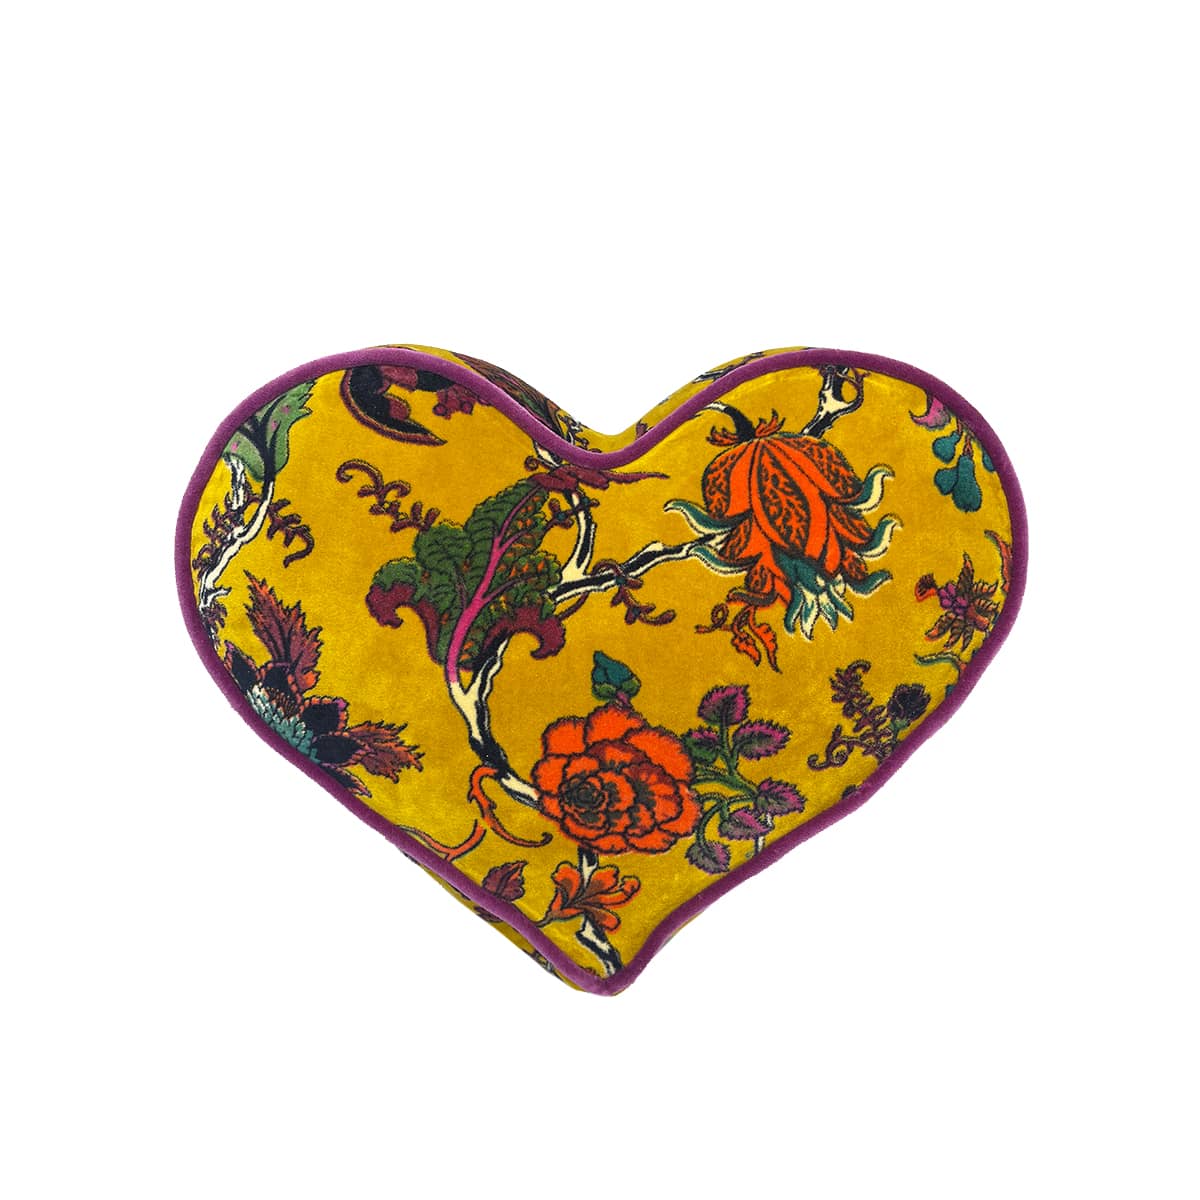 Heart Pillow – Floral on curry